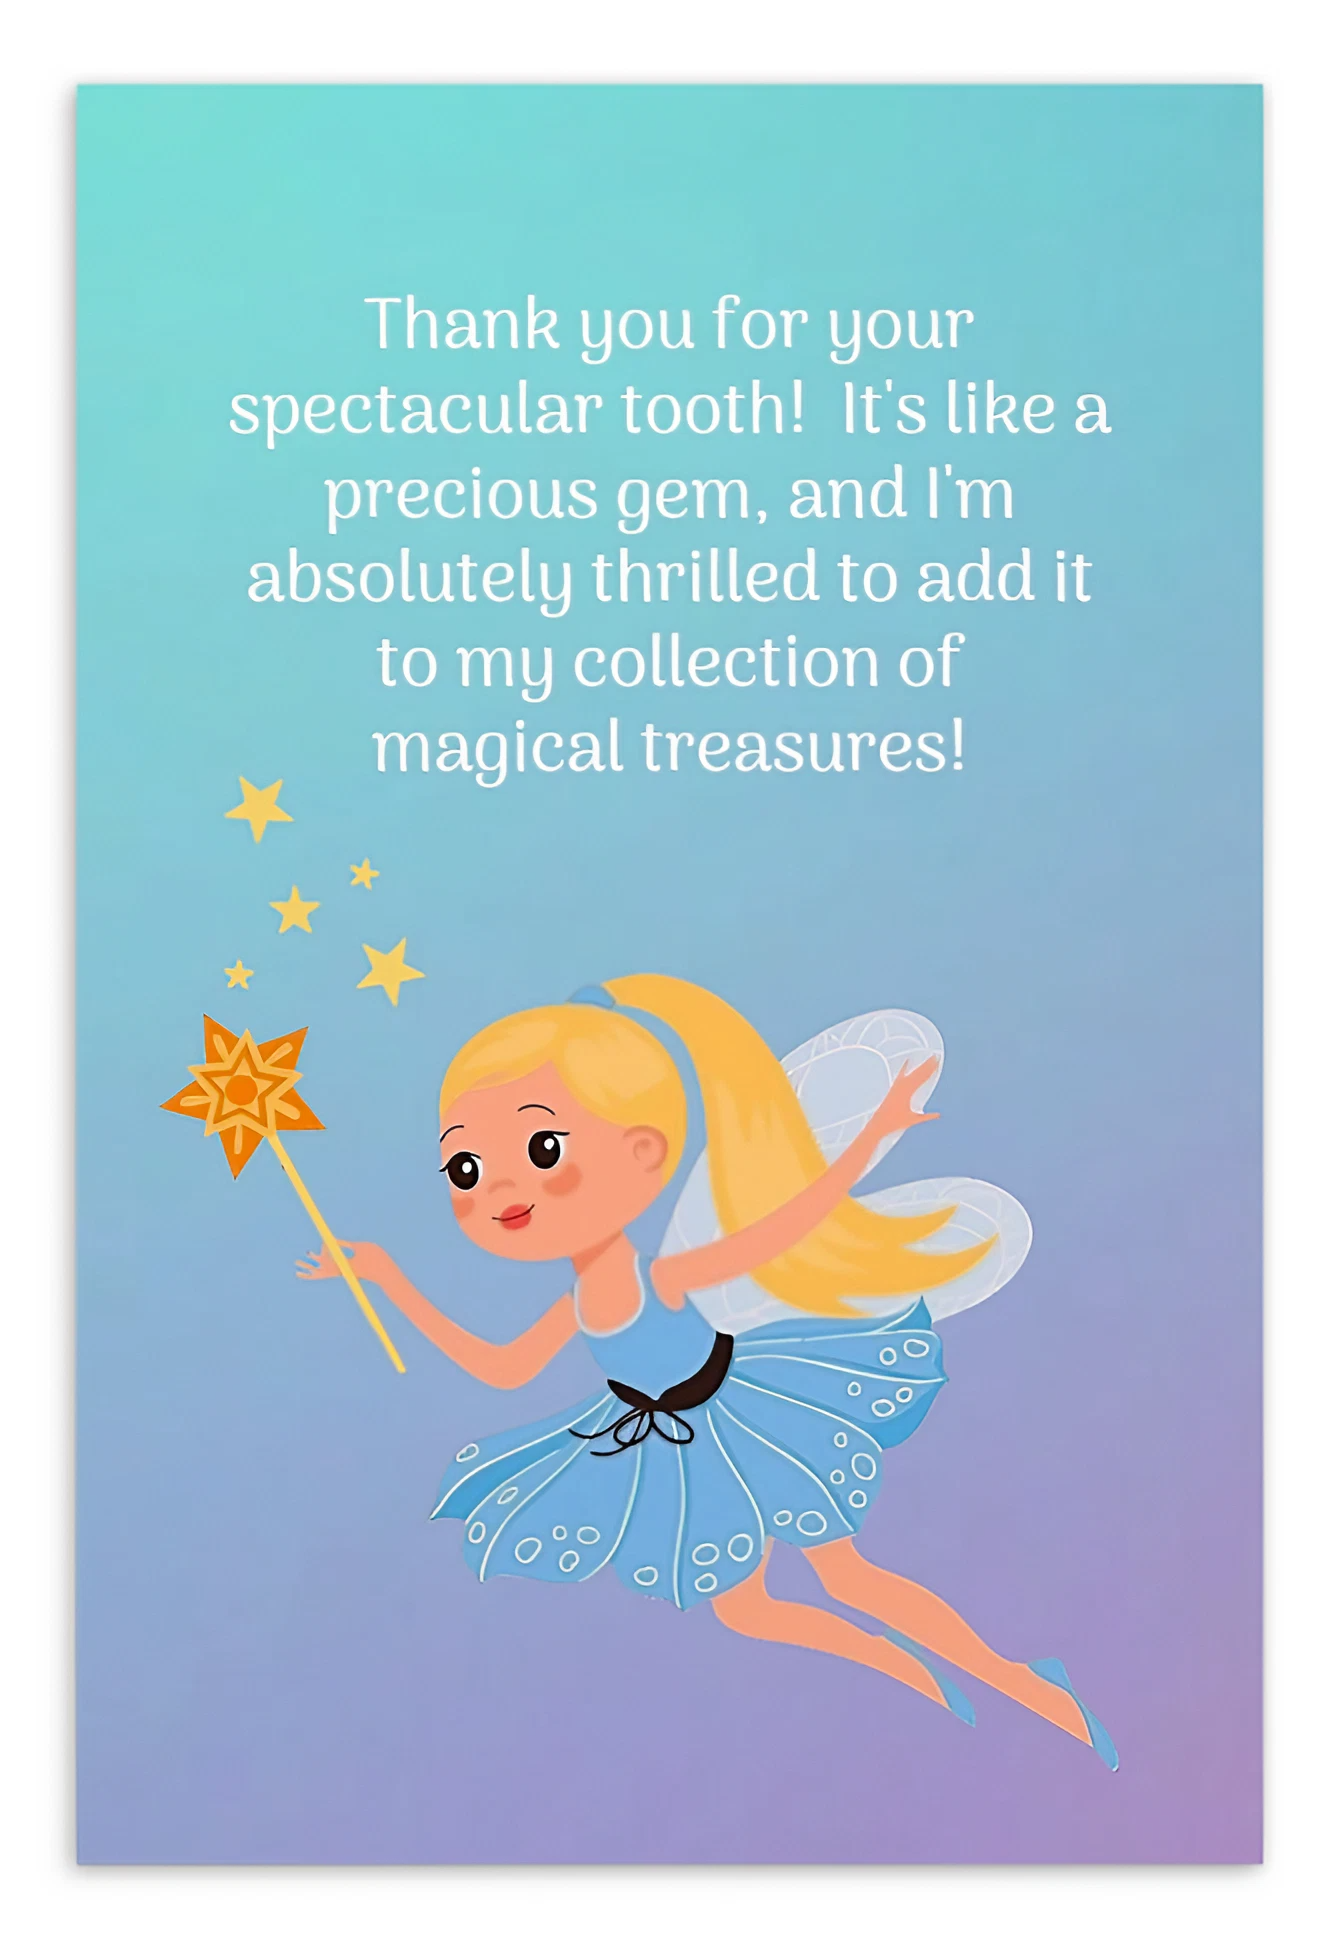 Tooth Fairy Thank You Cards-  Thank You For Your Spectacular Tooth!